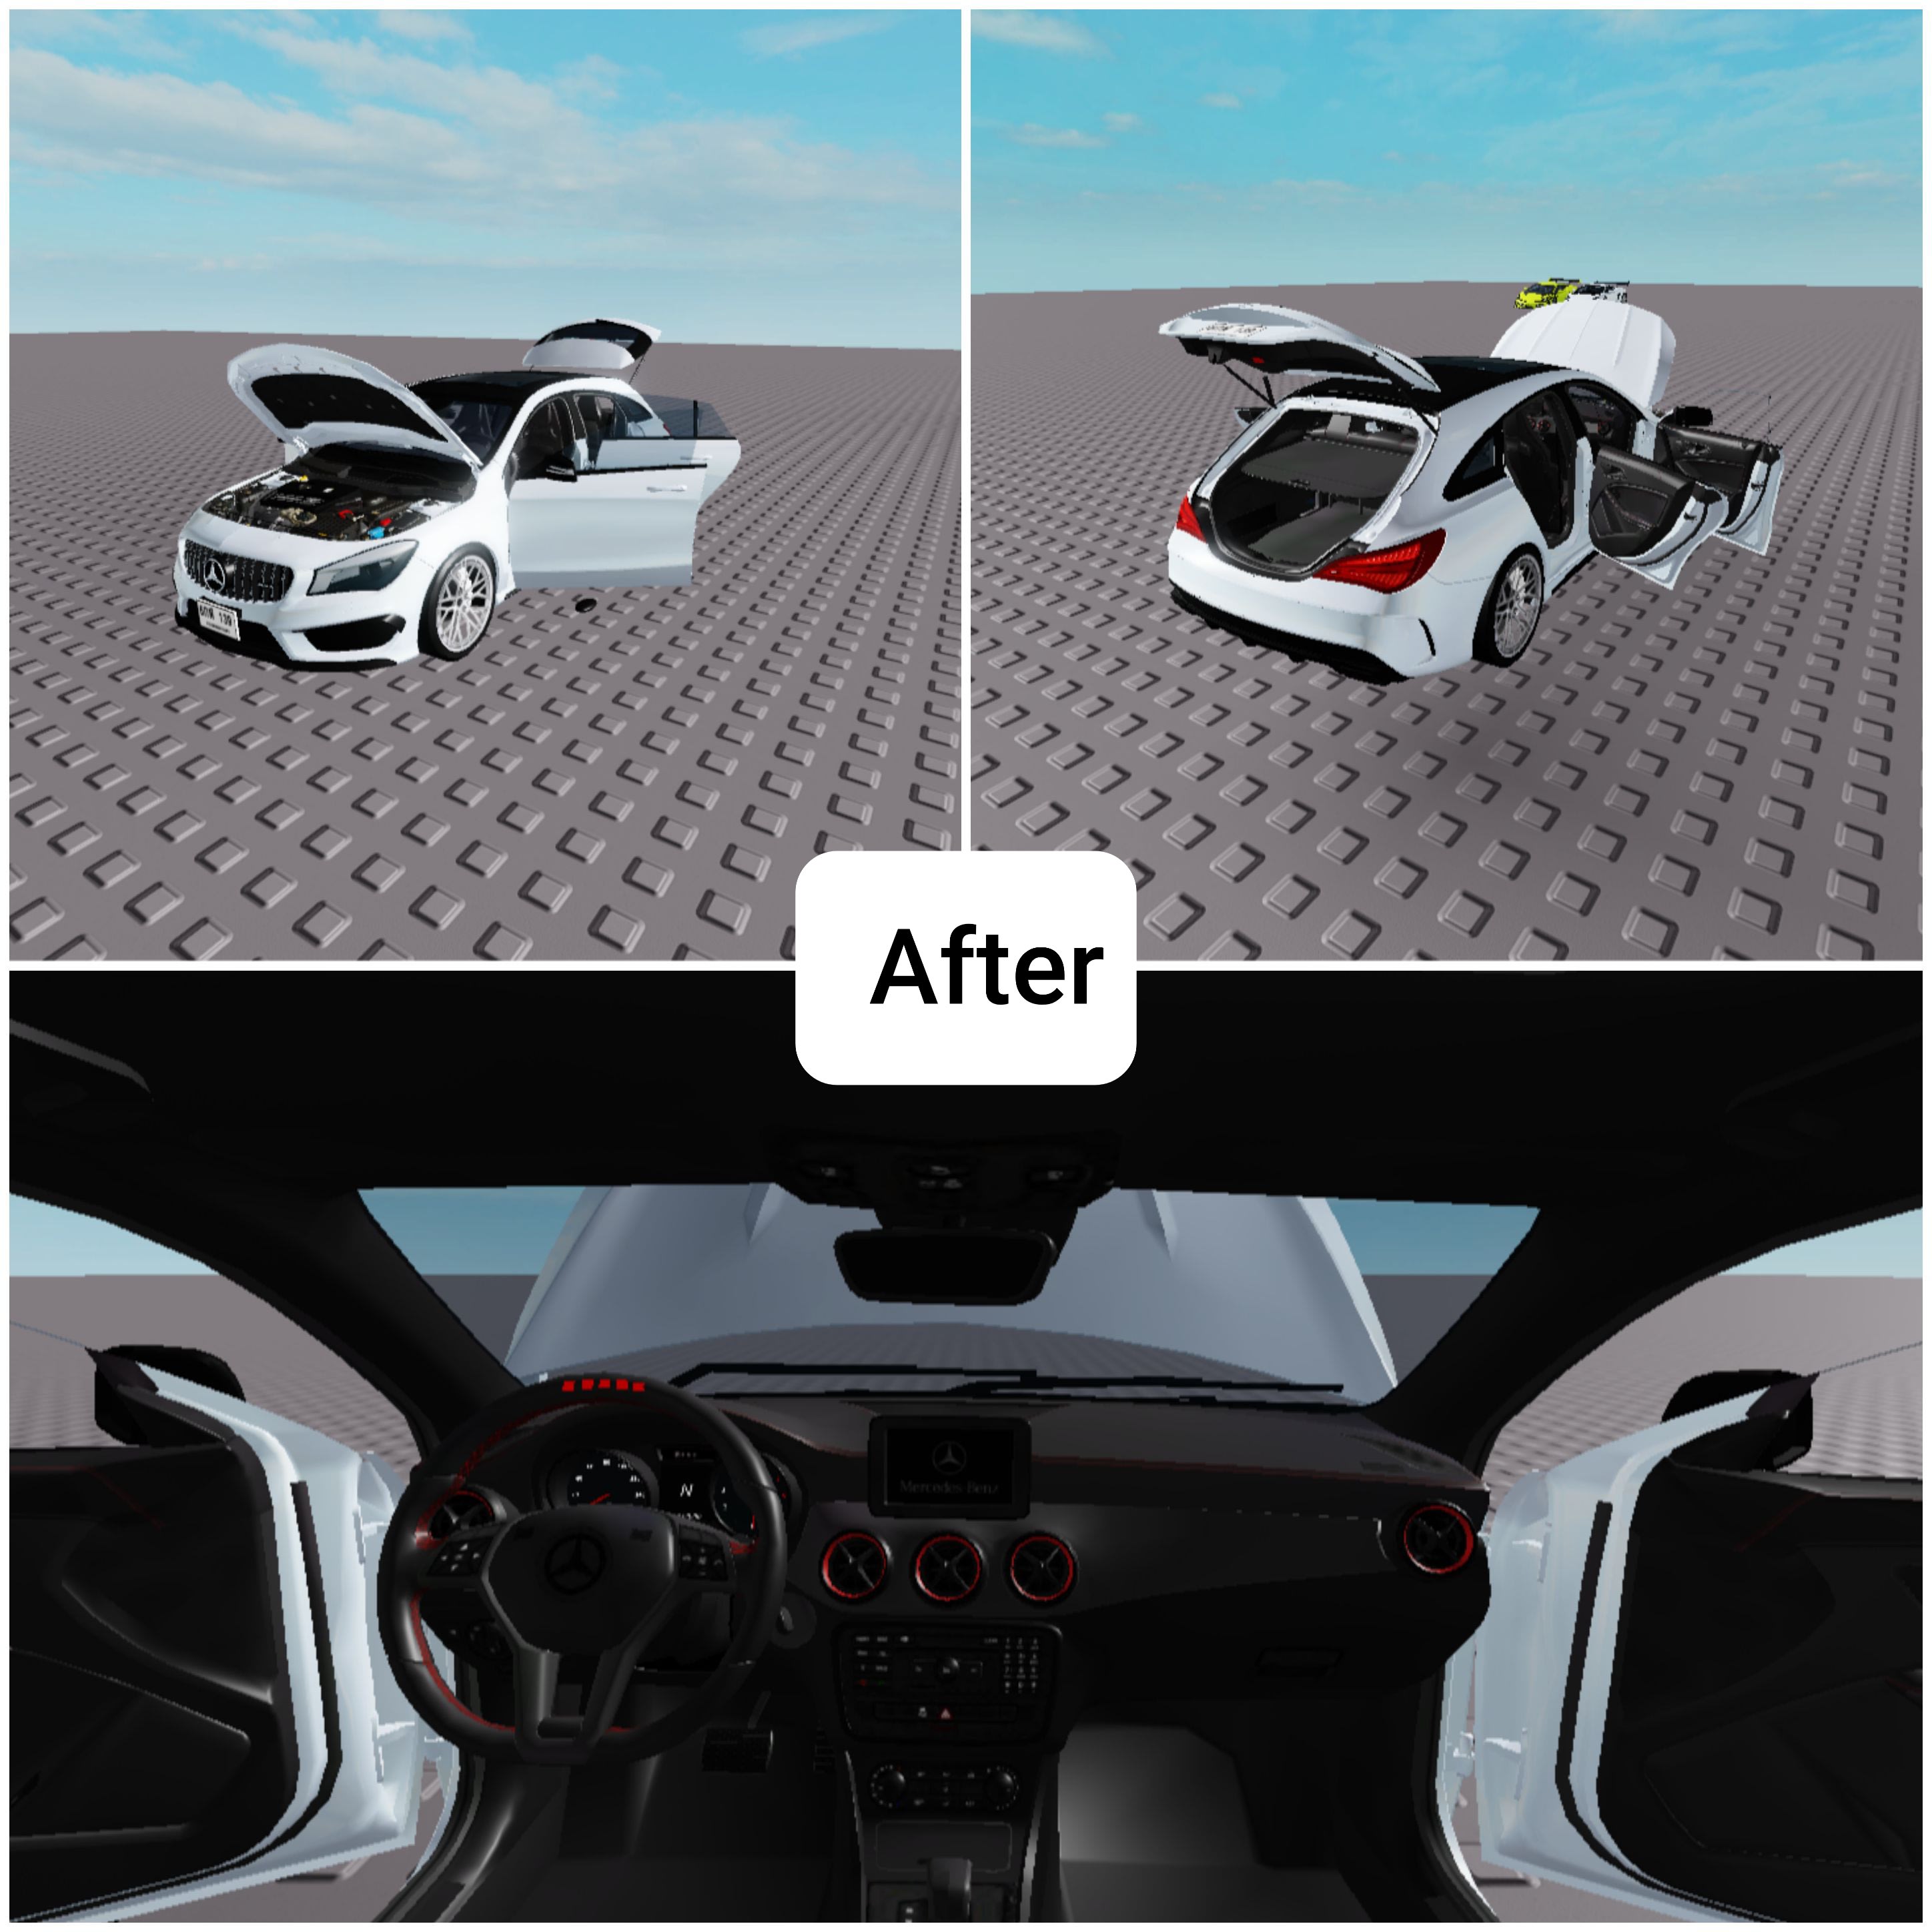 Modify Your Car Model In Roblox Studio With The Specifications You Desire By Sebastian Yeong - roblox steering wheel